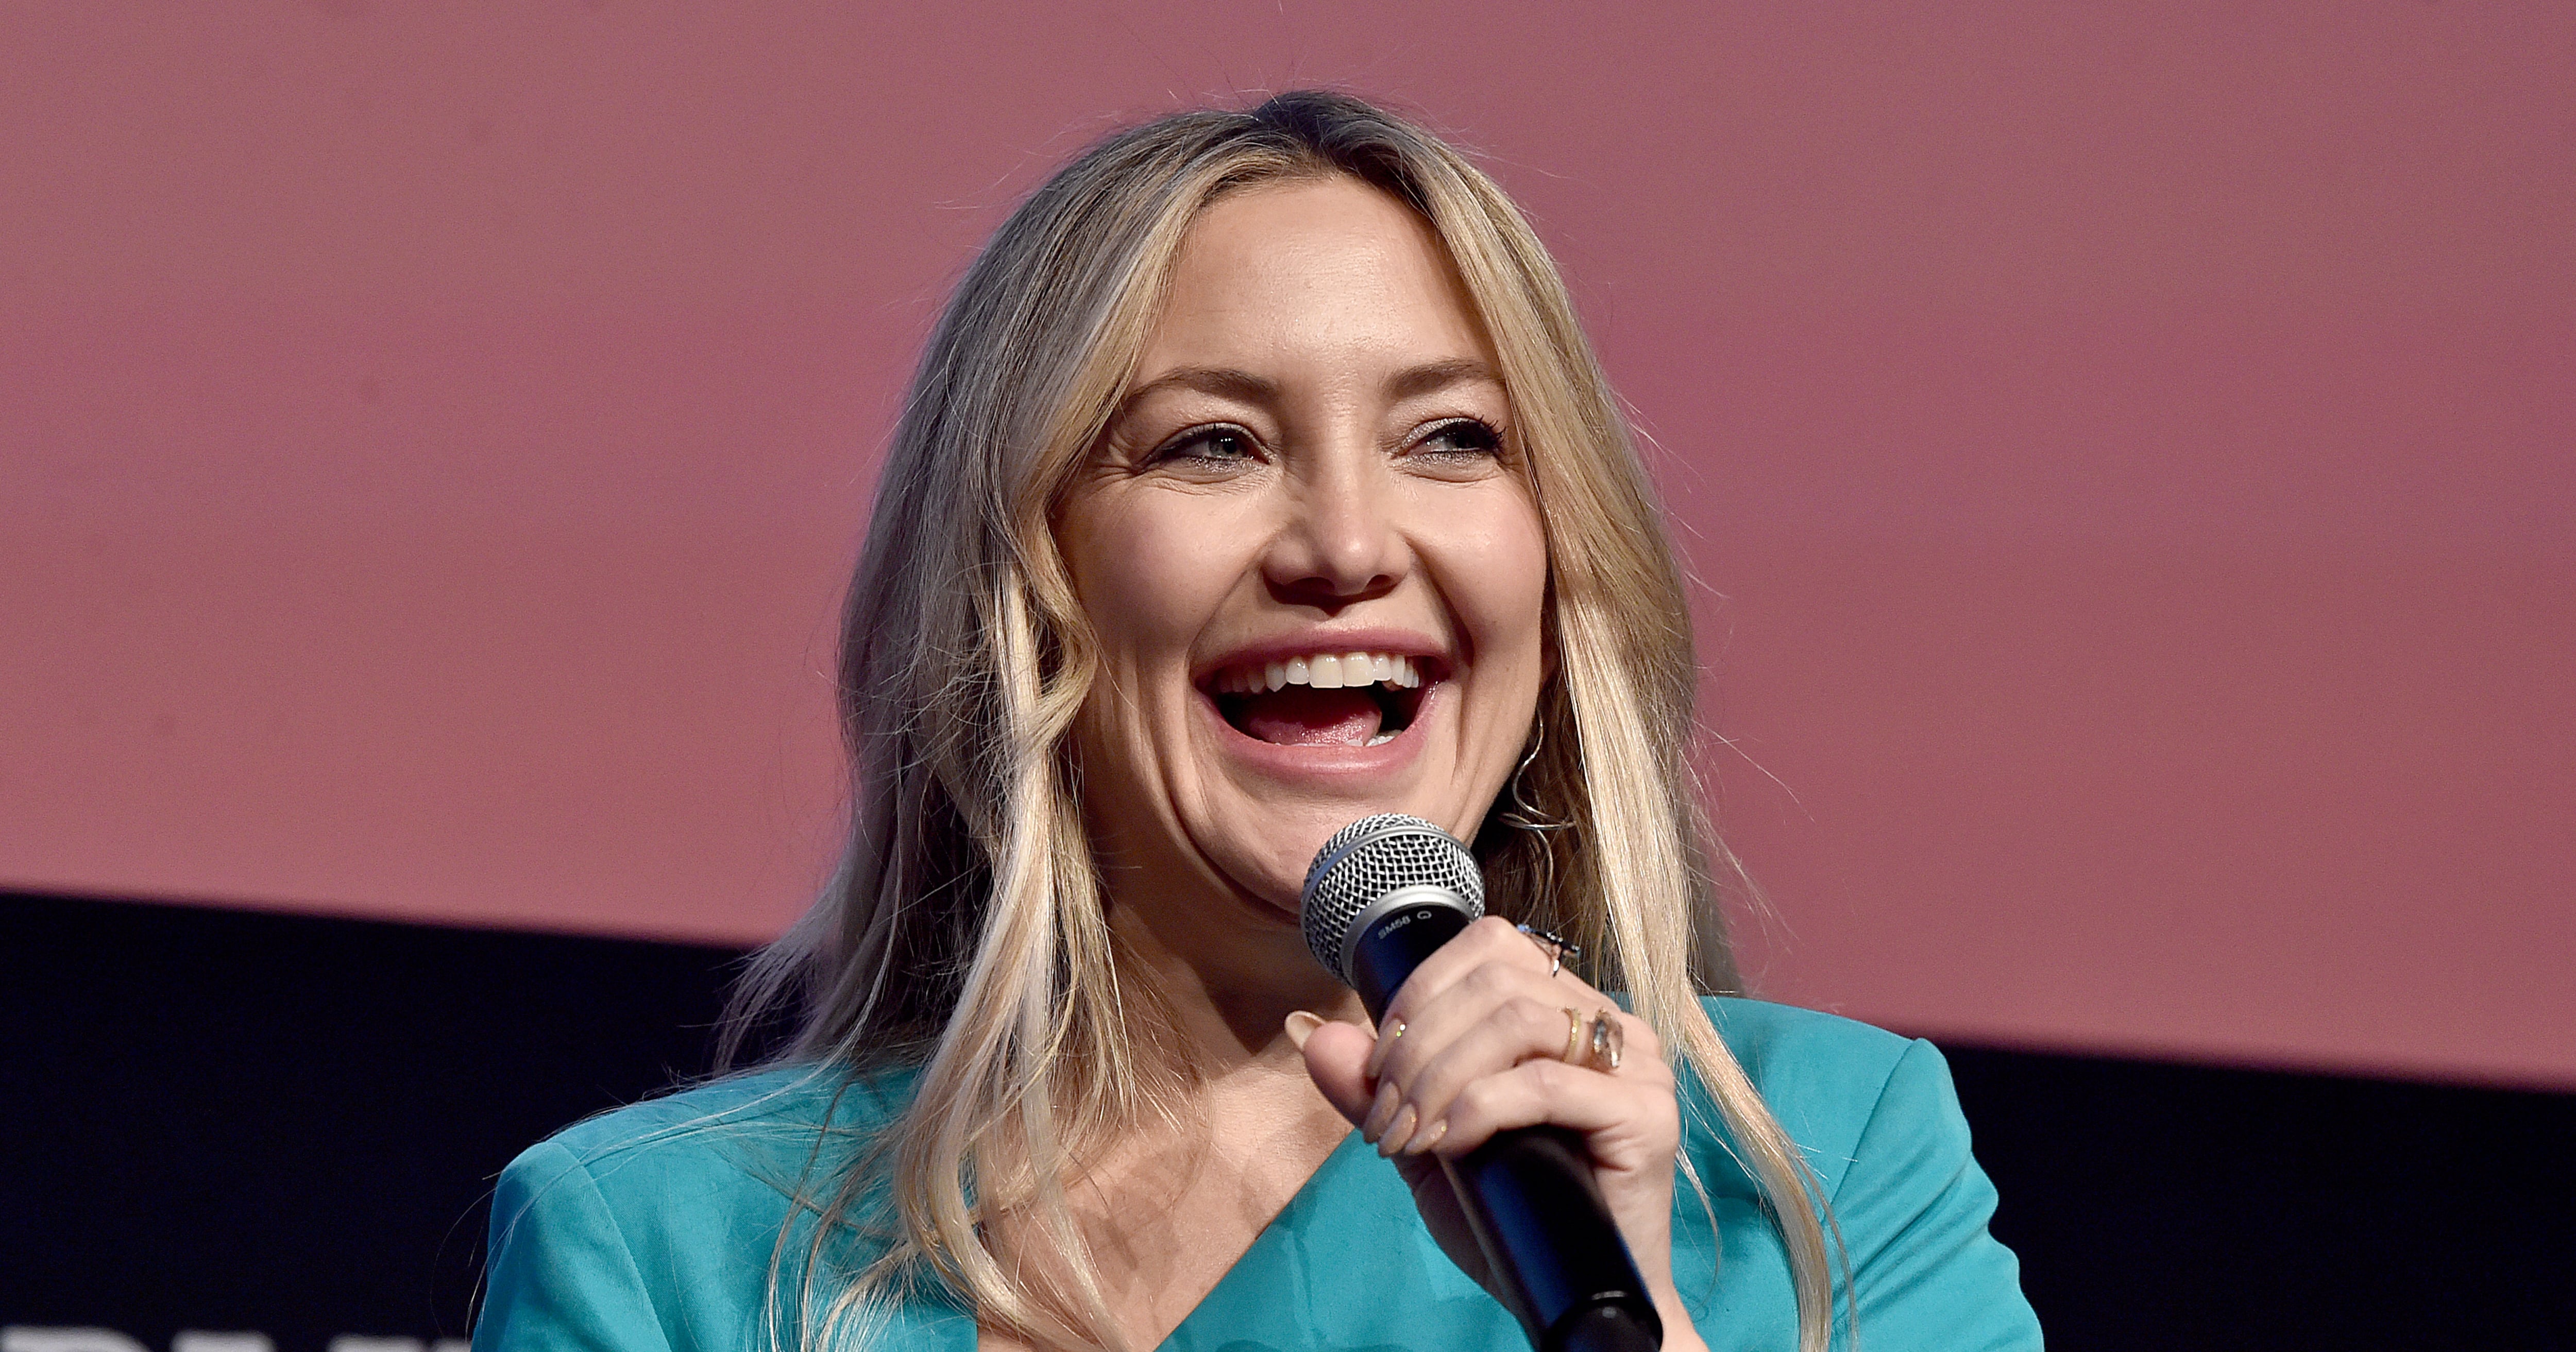 Kate Hudson gives release date for new music